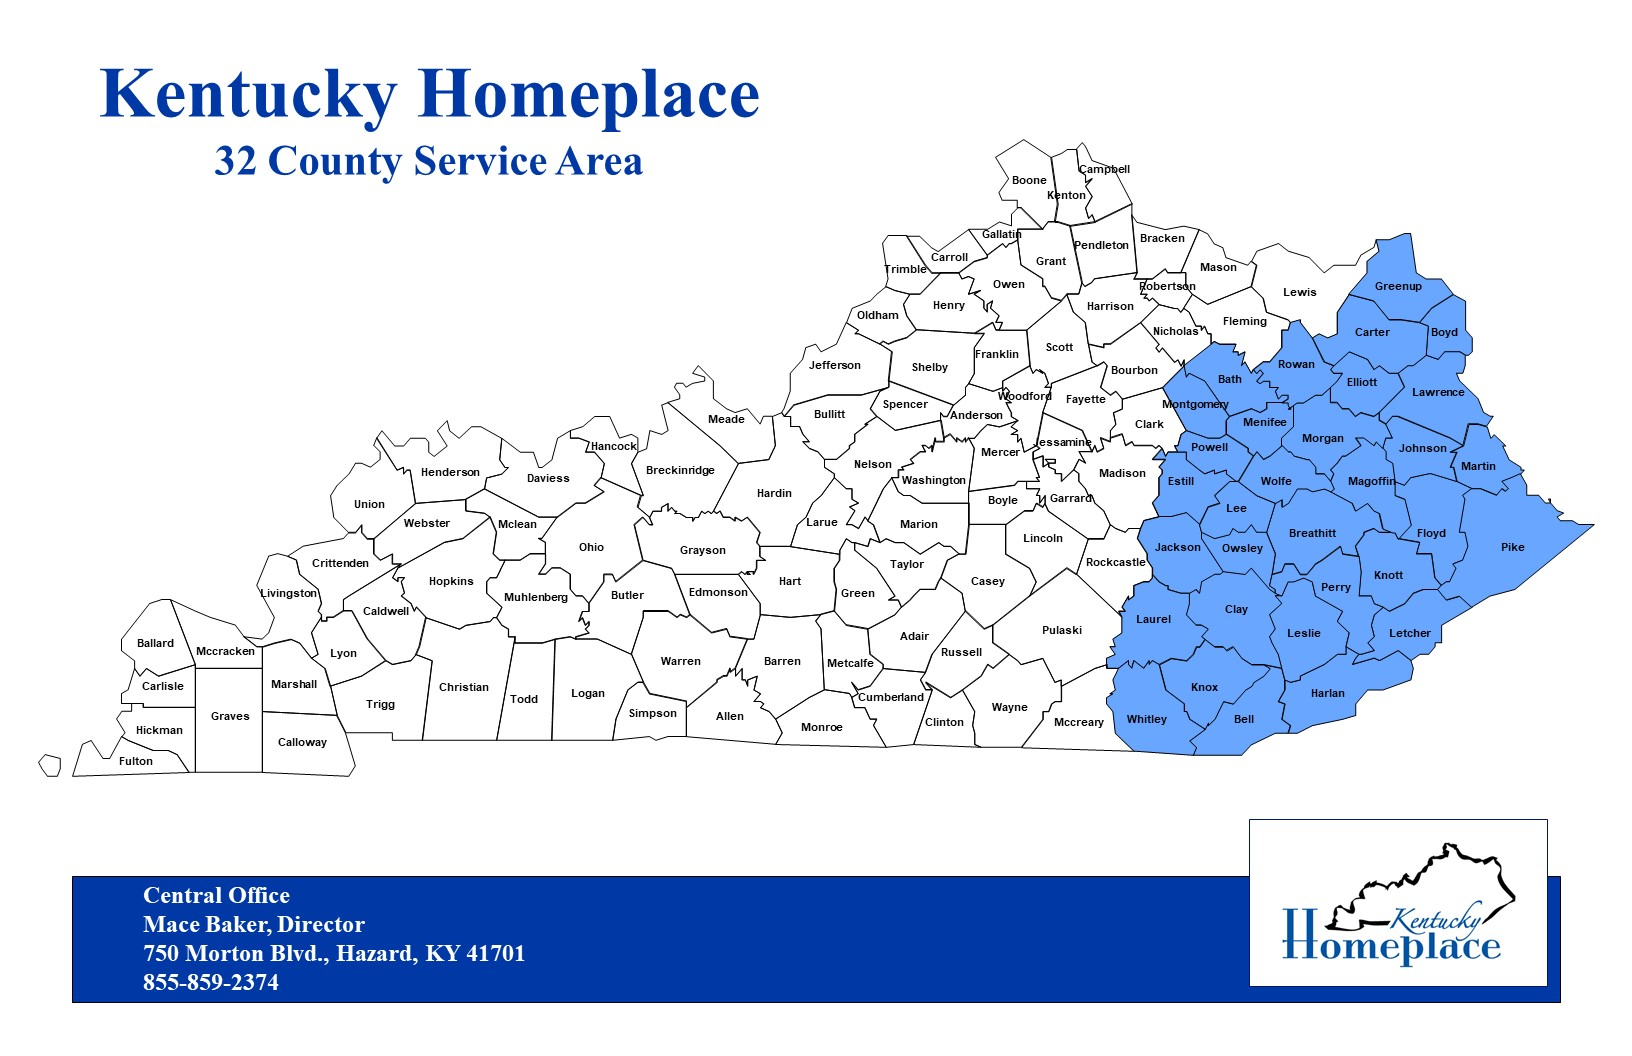 Kentucky Homeplace 31 county service area